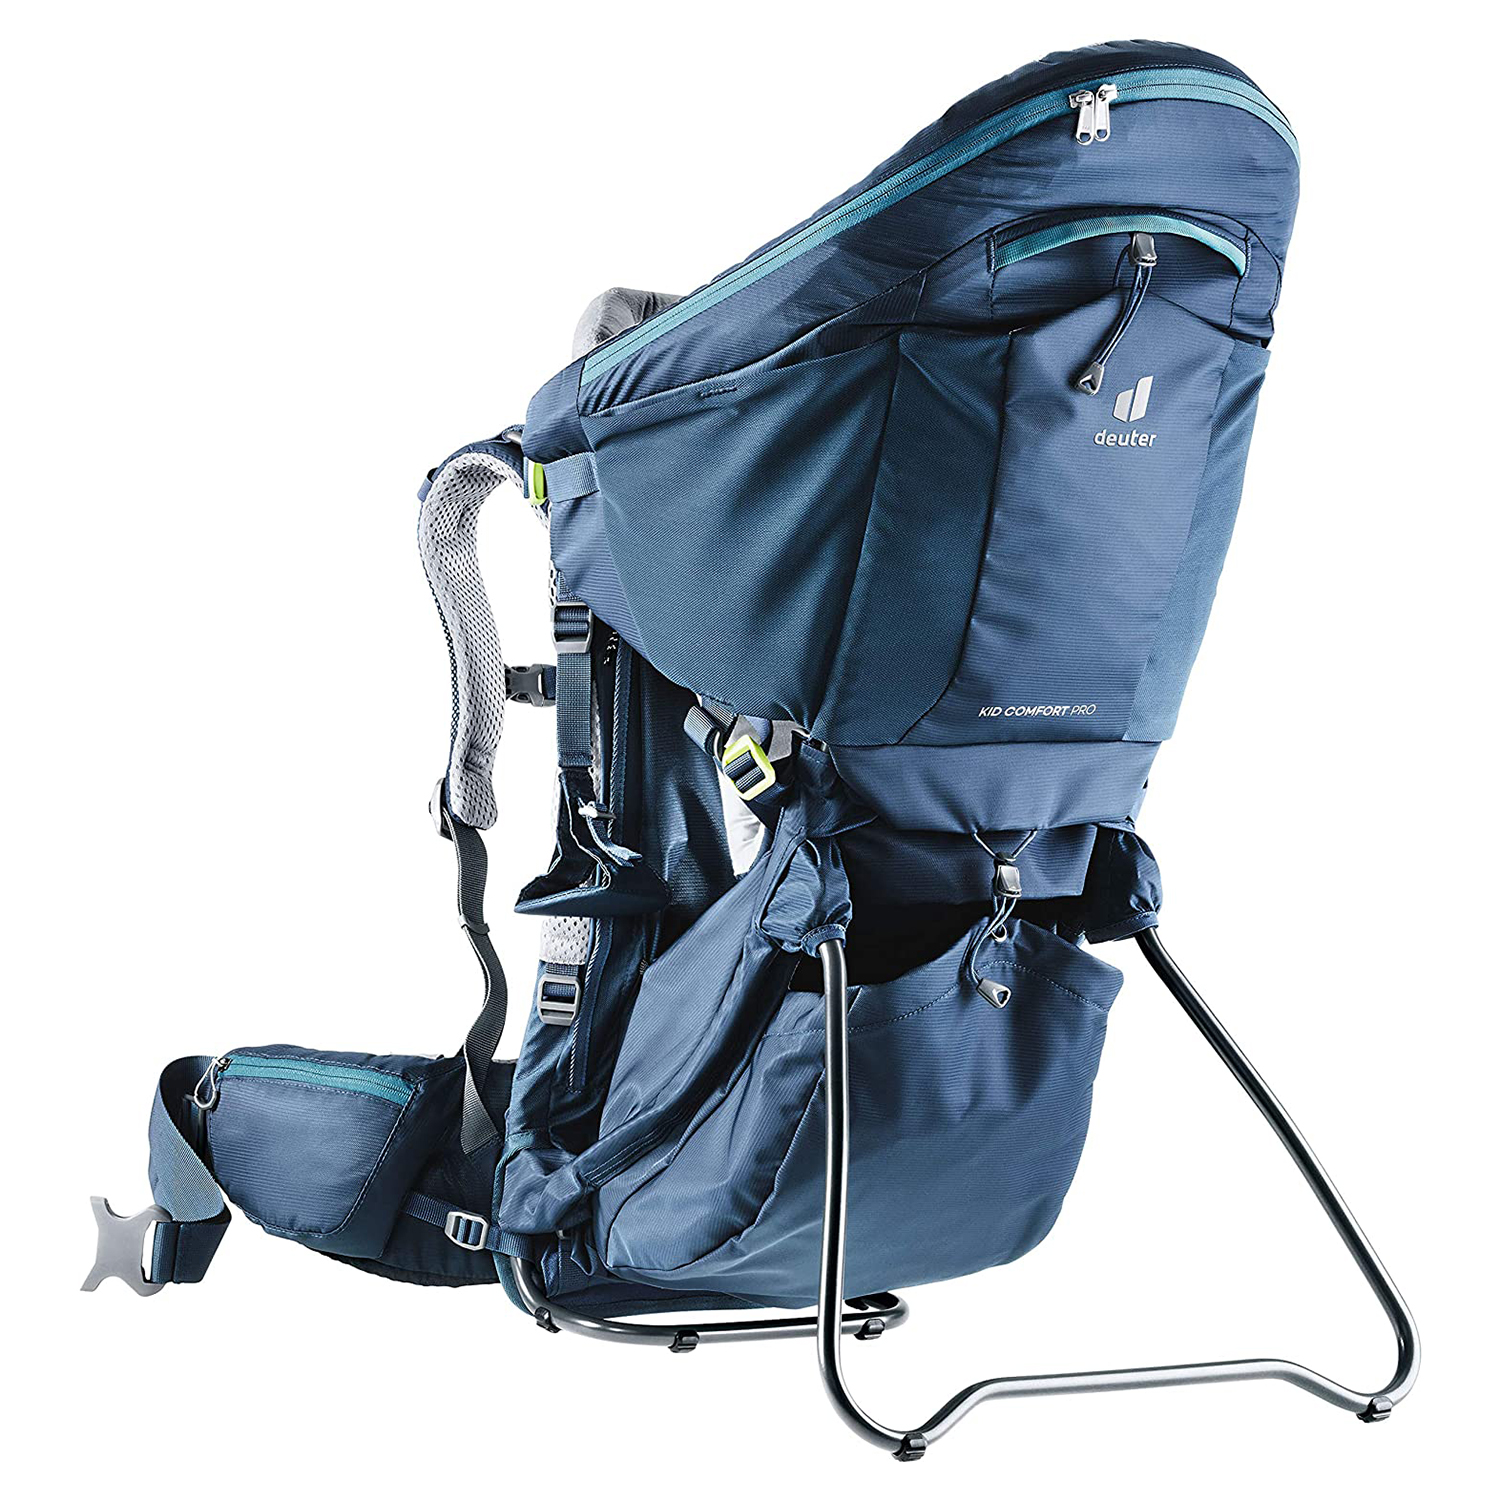 Hiking Baby Carrier With the Most Bells and Whistles: Deuter Kid Comfort Pro Carrier